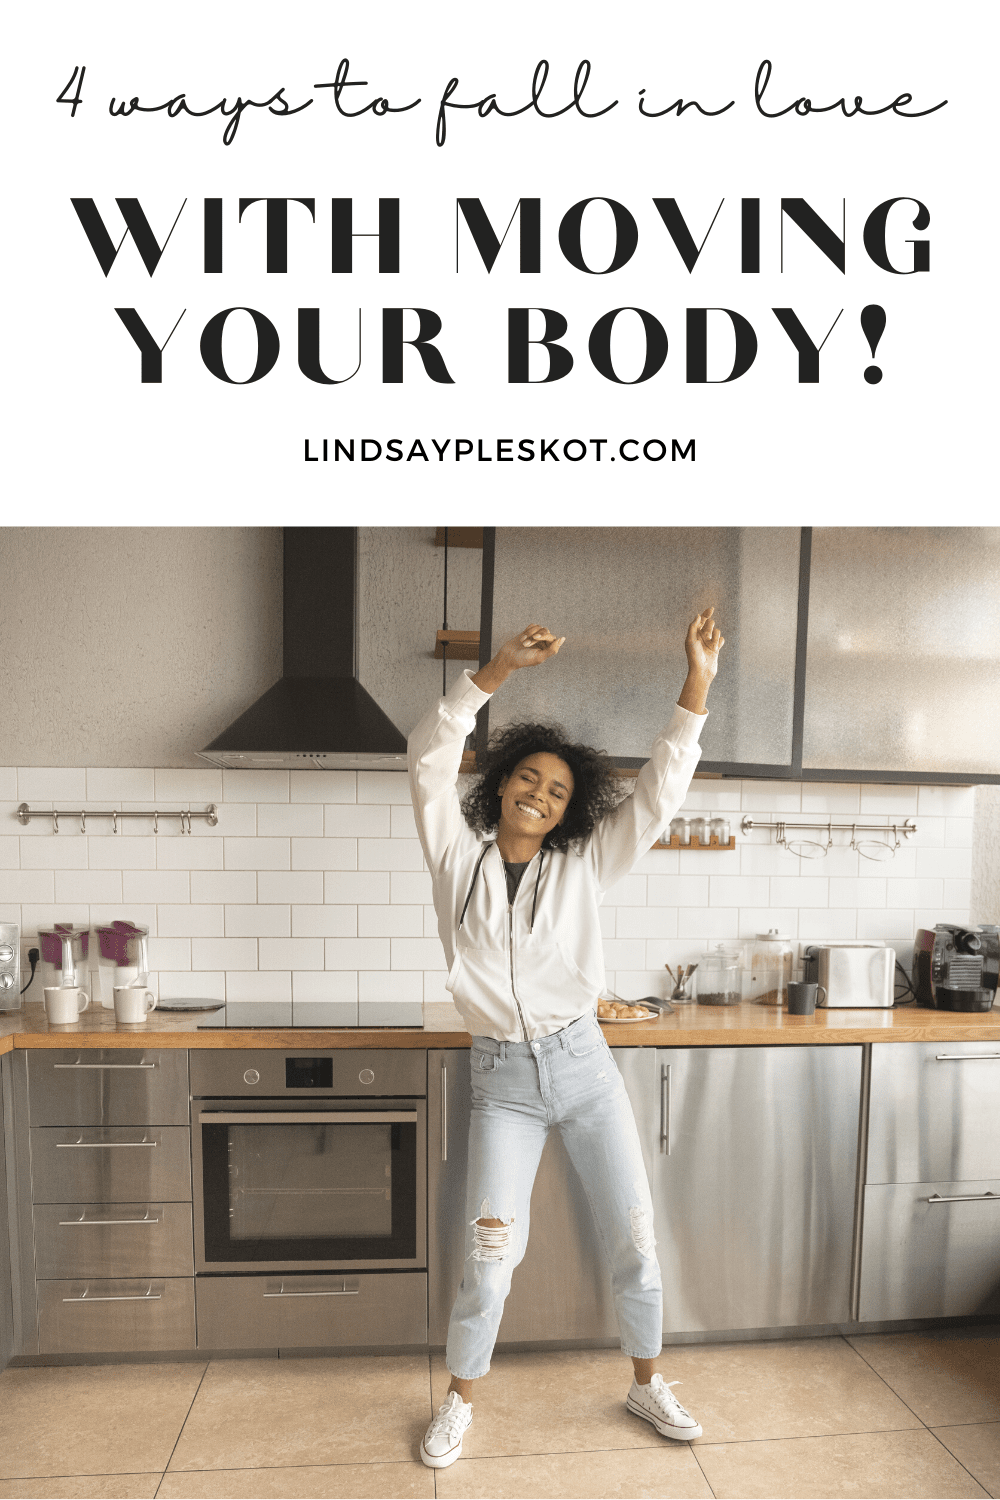 Woman dancing in a kitchen looking happy with her hands in the air. Text above reads "4 ways to fall in love with moving your body lindsaypleskot.com"